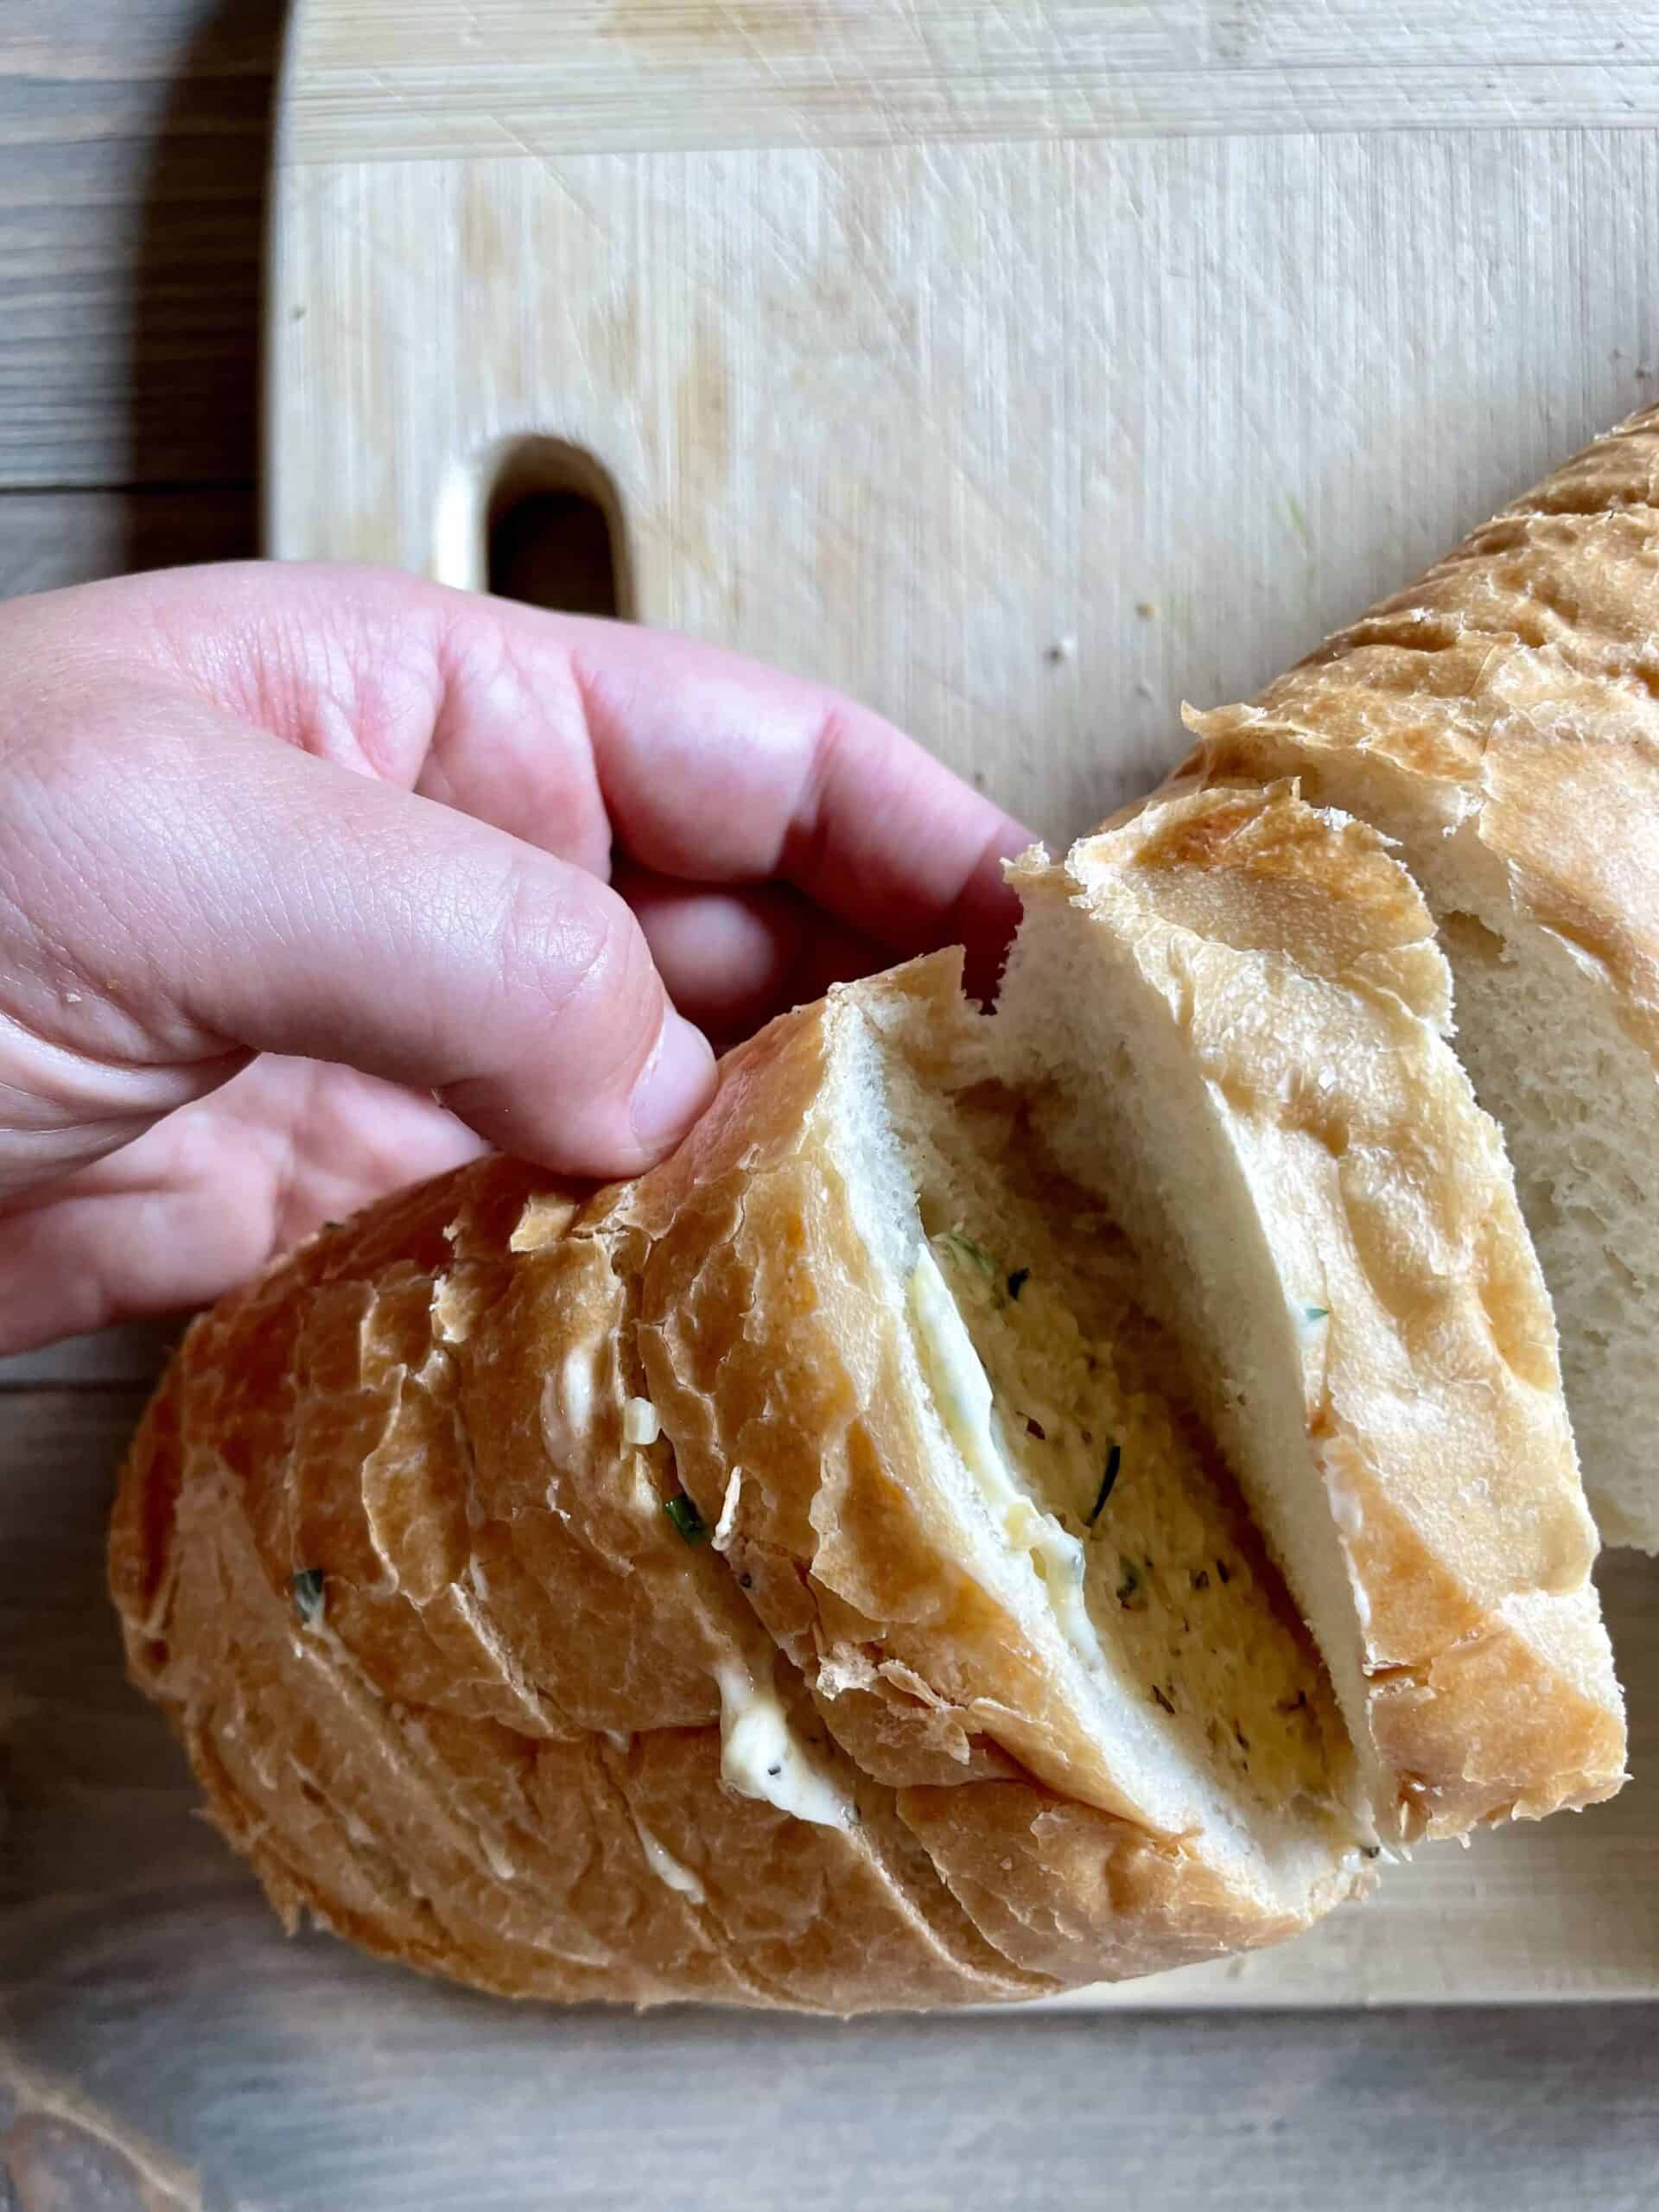 French bread slices are slathered with vegan garlic butter. The bread is held up with a hand.